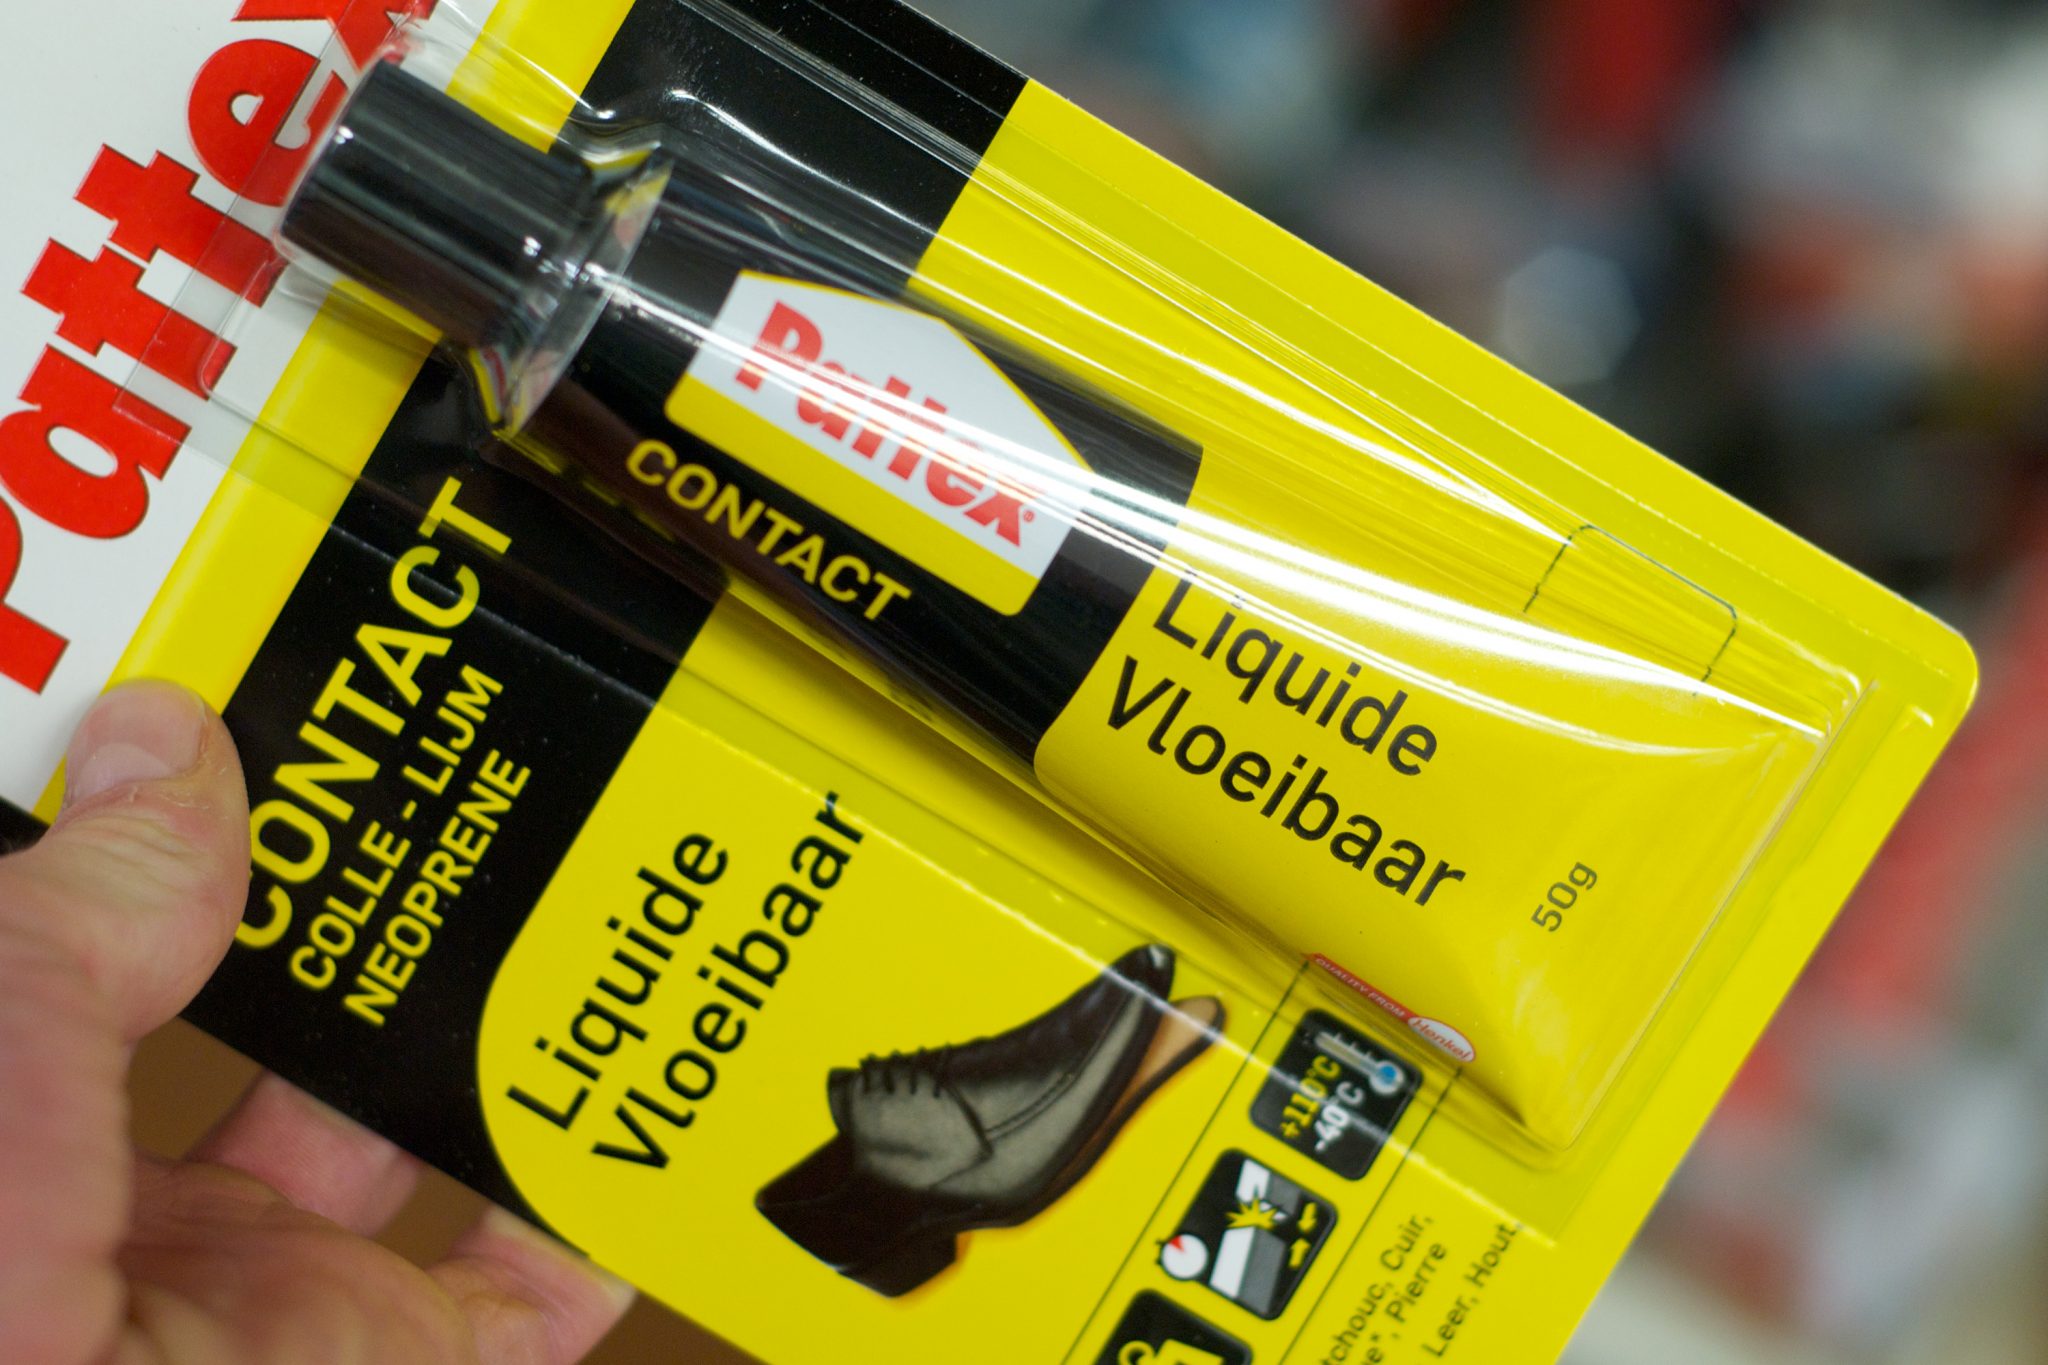 Best Glue for Shoes